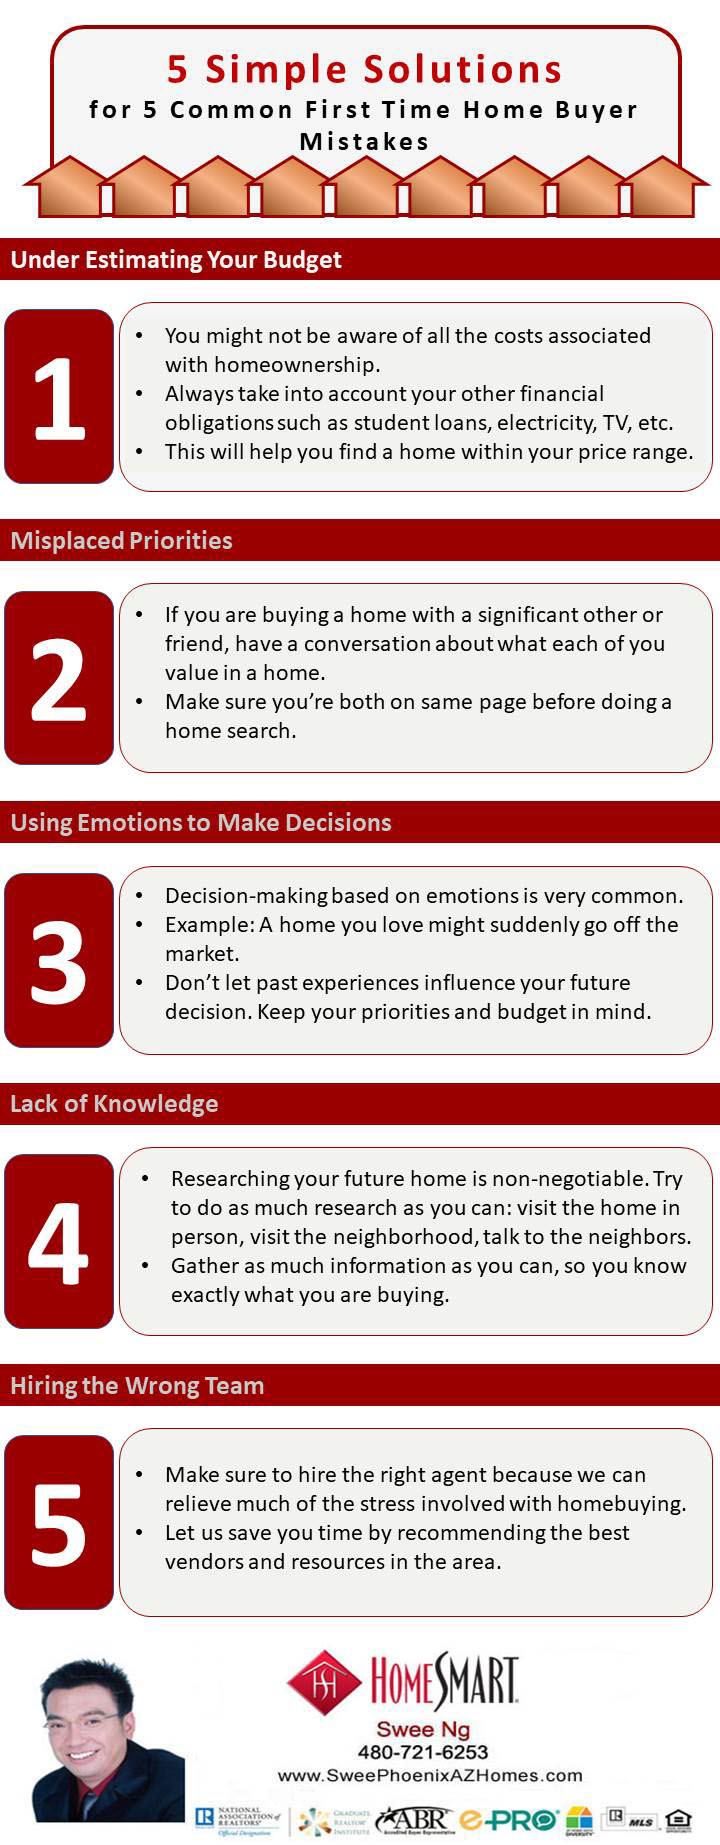 5 First Time Home Buyer Mistakes and Simple Solutions